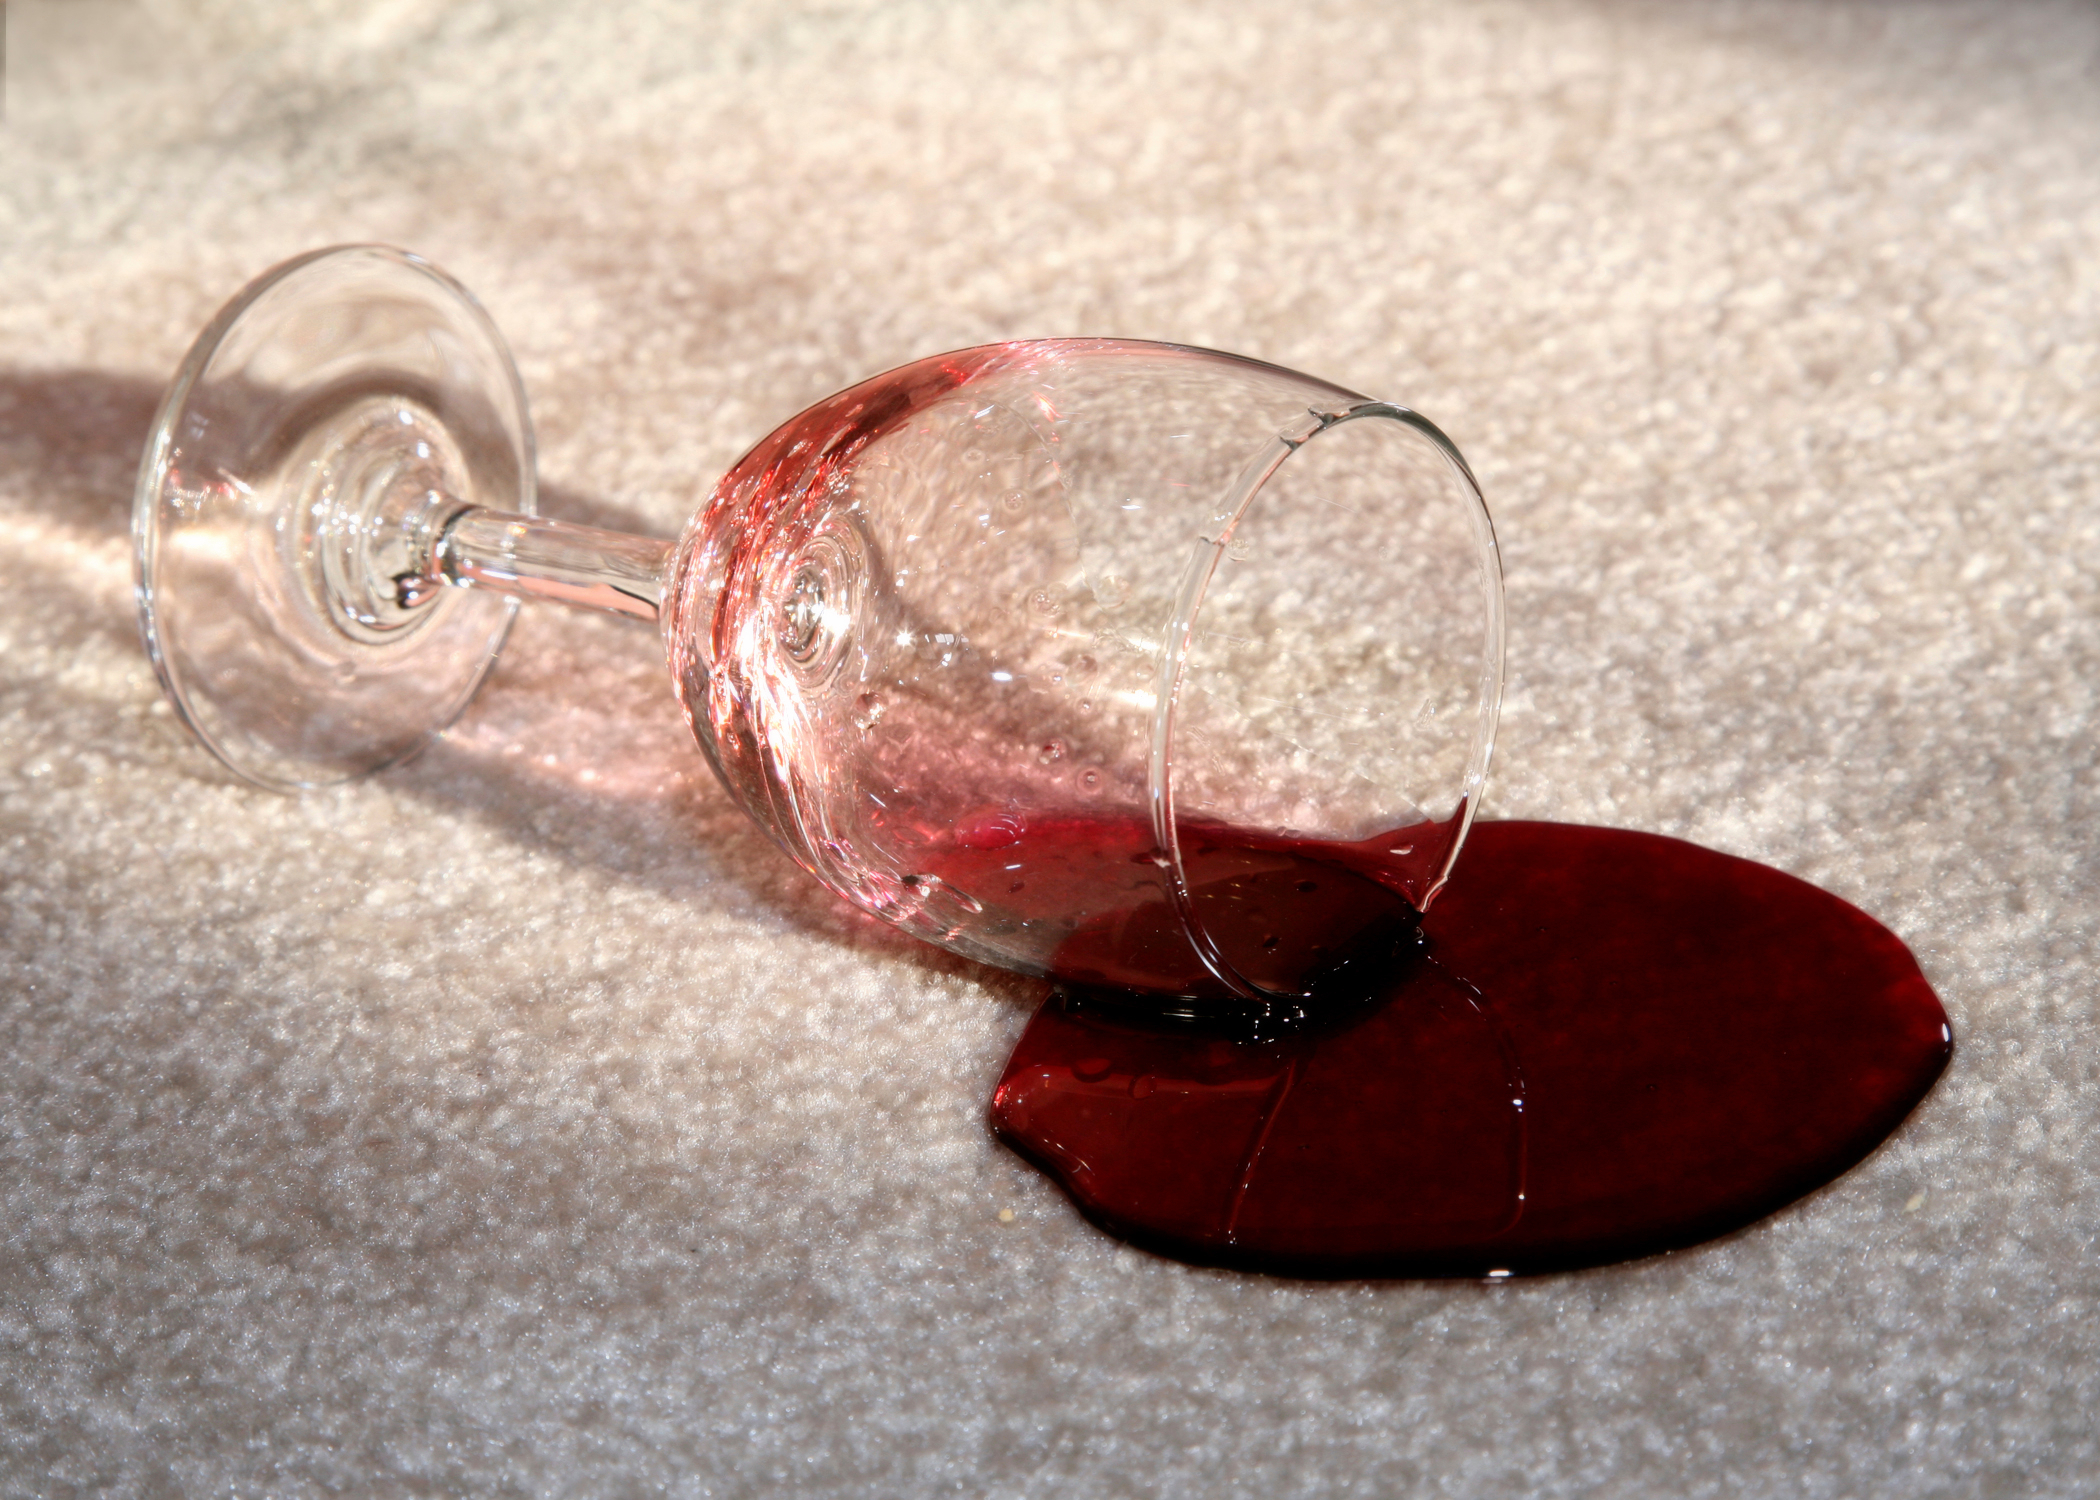 Whoops! Don't let slips and spills get you down- call Zachary's Chem-Dry for specialty stain removal Zachary's Chem-Dry Jacksonville (904)620-7310